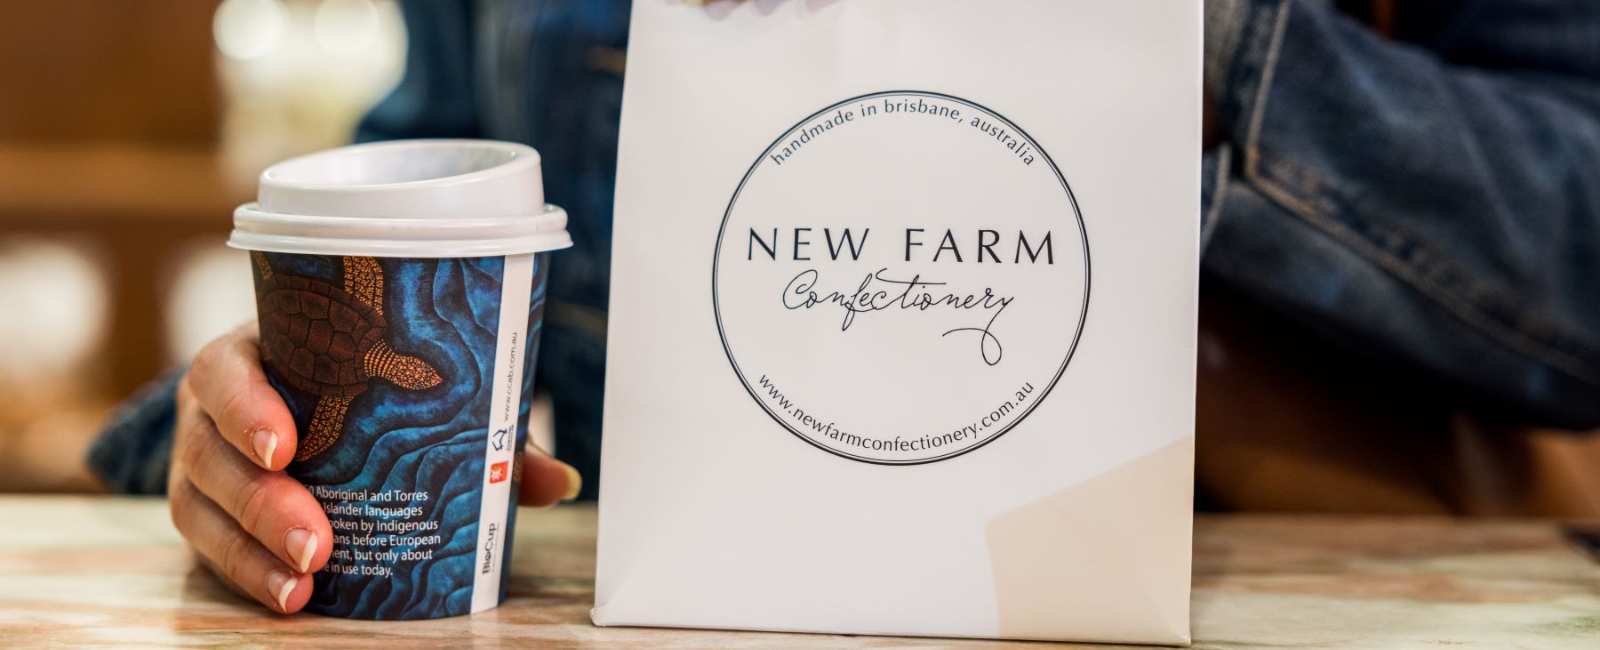 Takeaway coffee from New Farm Confectionery